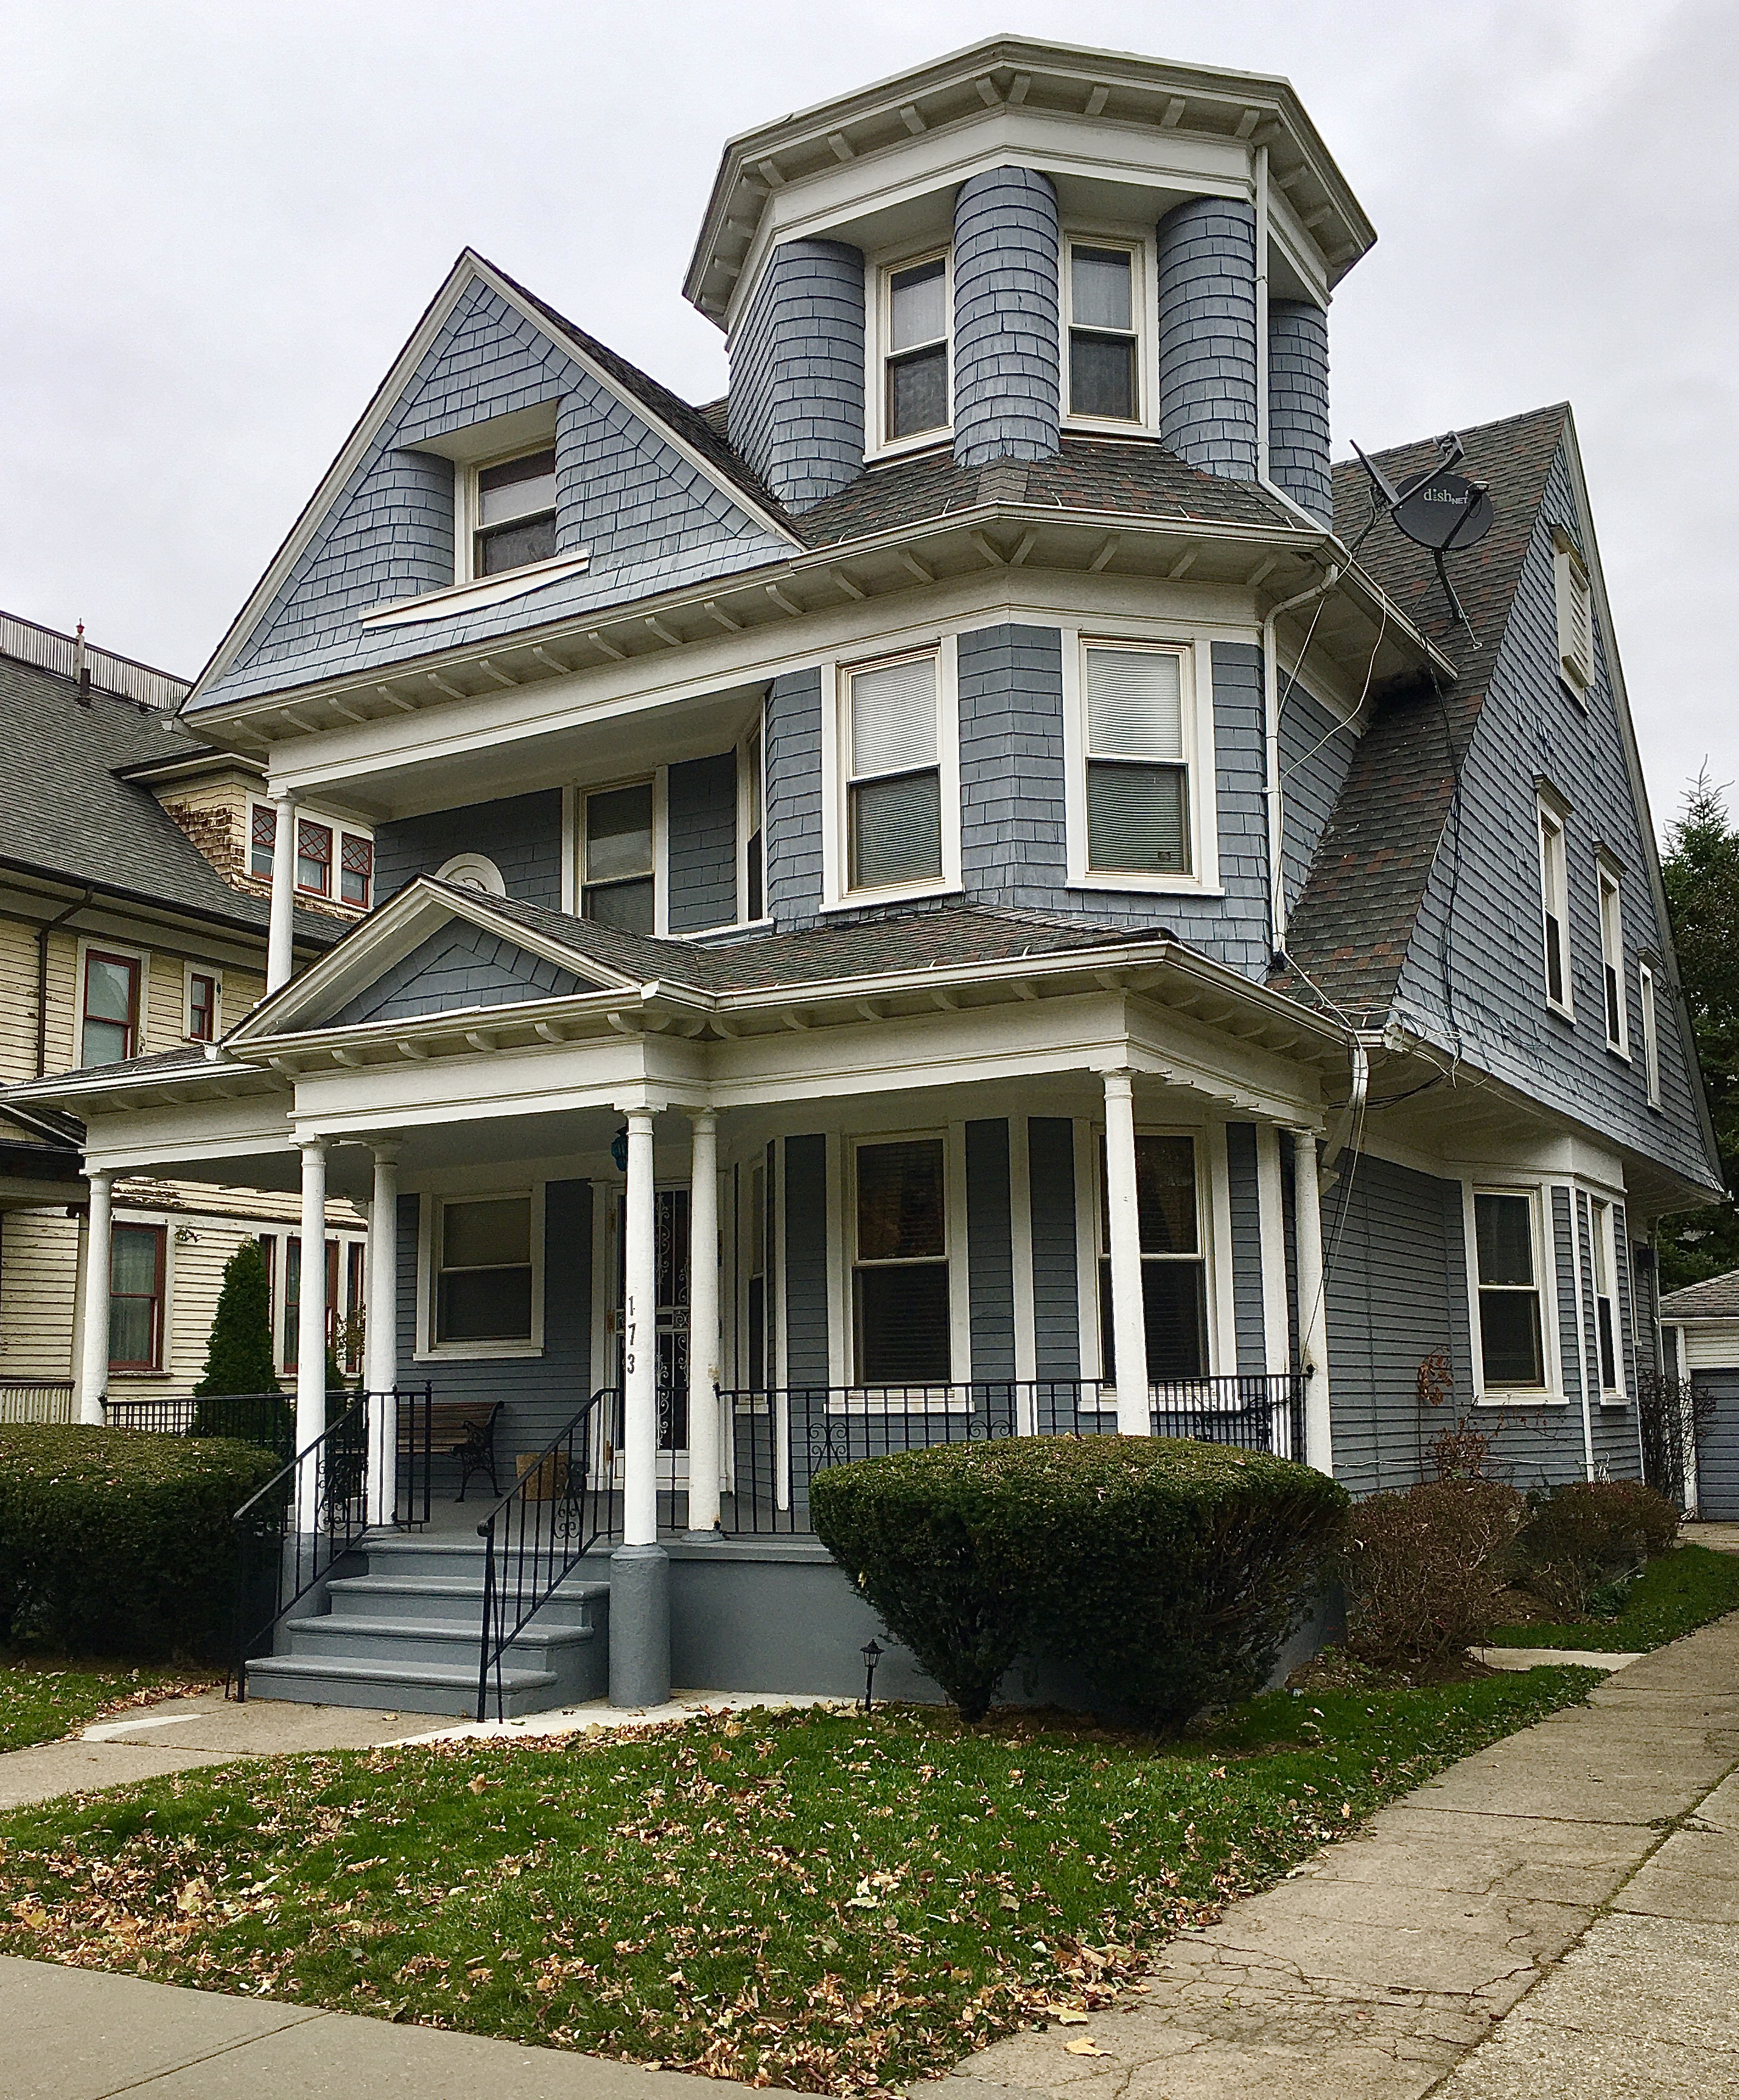  Architect Benjamin Driesler designed 173 Westminster Road in 1898. It’s located in the Prospect Park South Historic District. Photo: Lore Croghan/Brooklyn Eagle